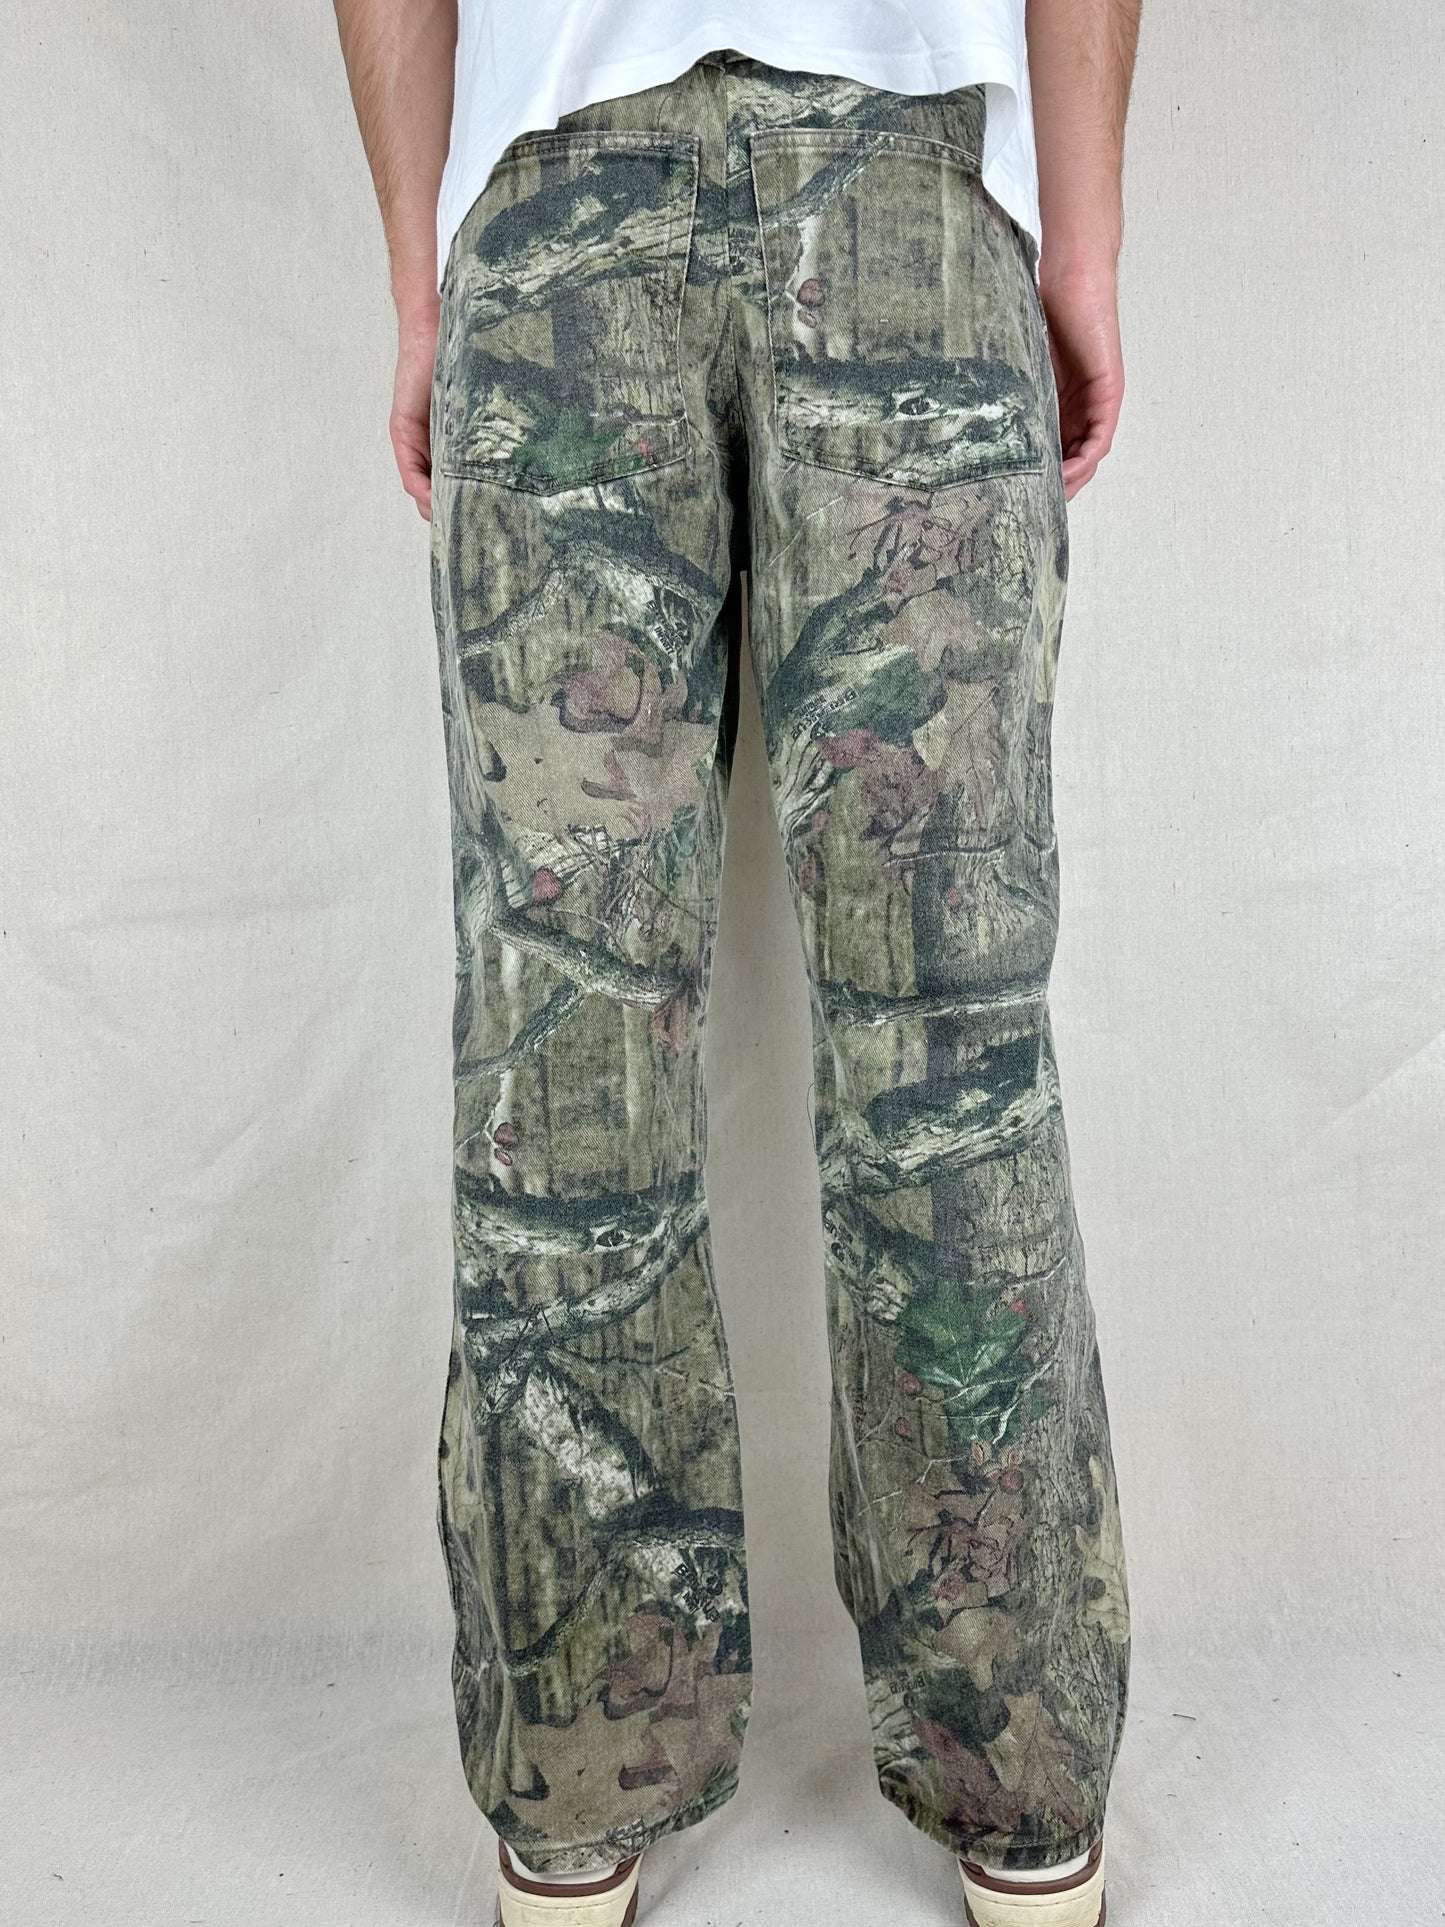 90's Realtree Camo Double Knee Vintage Jeans Size 31x31